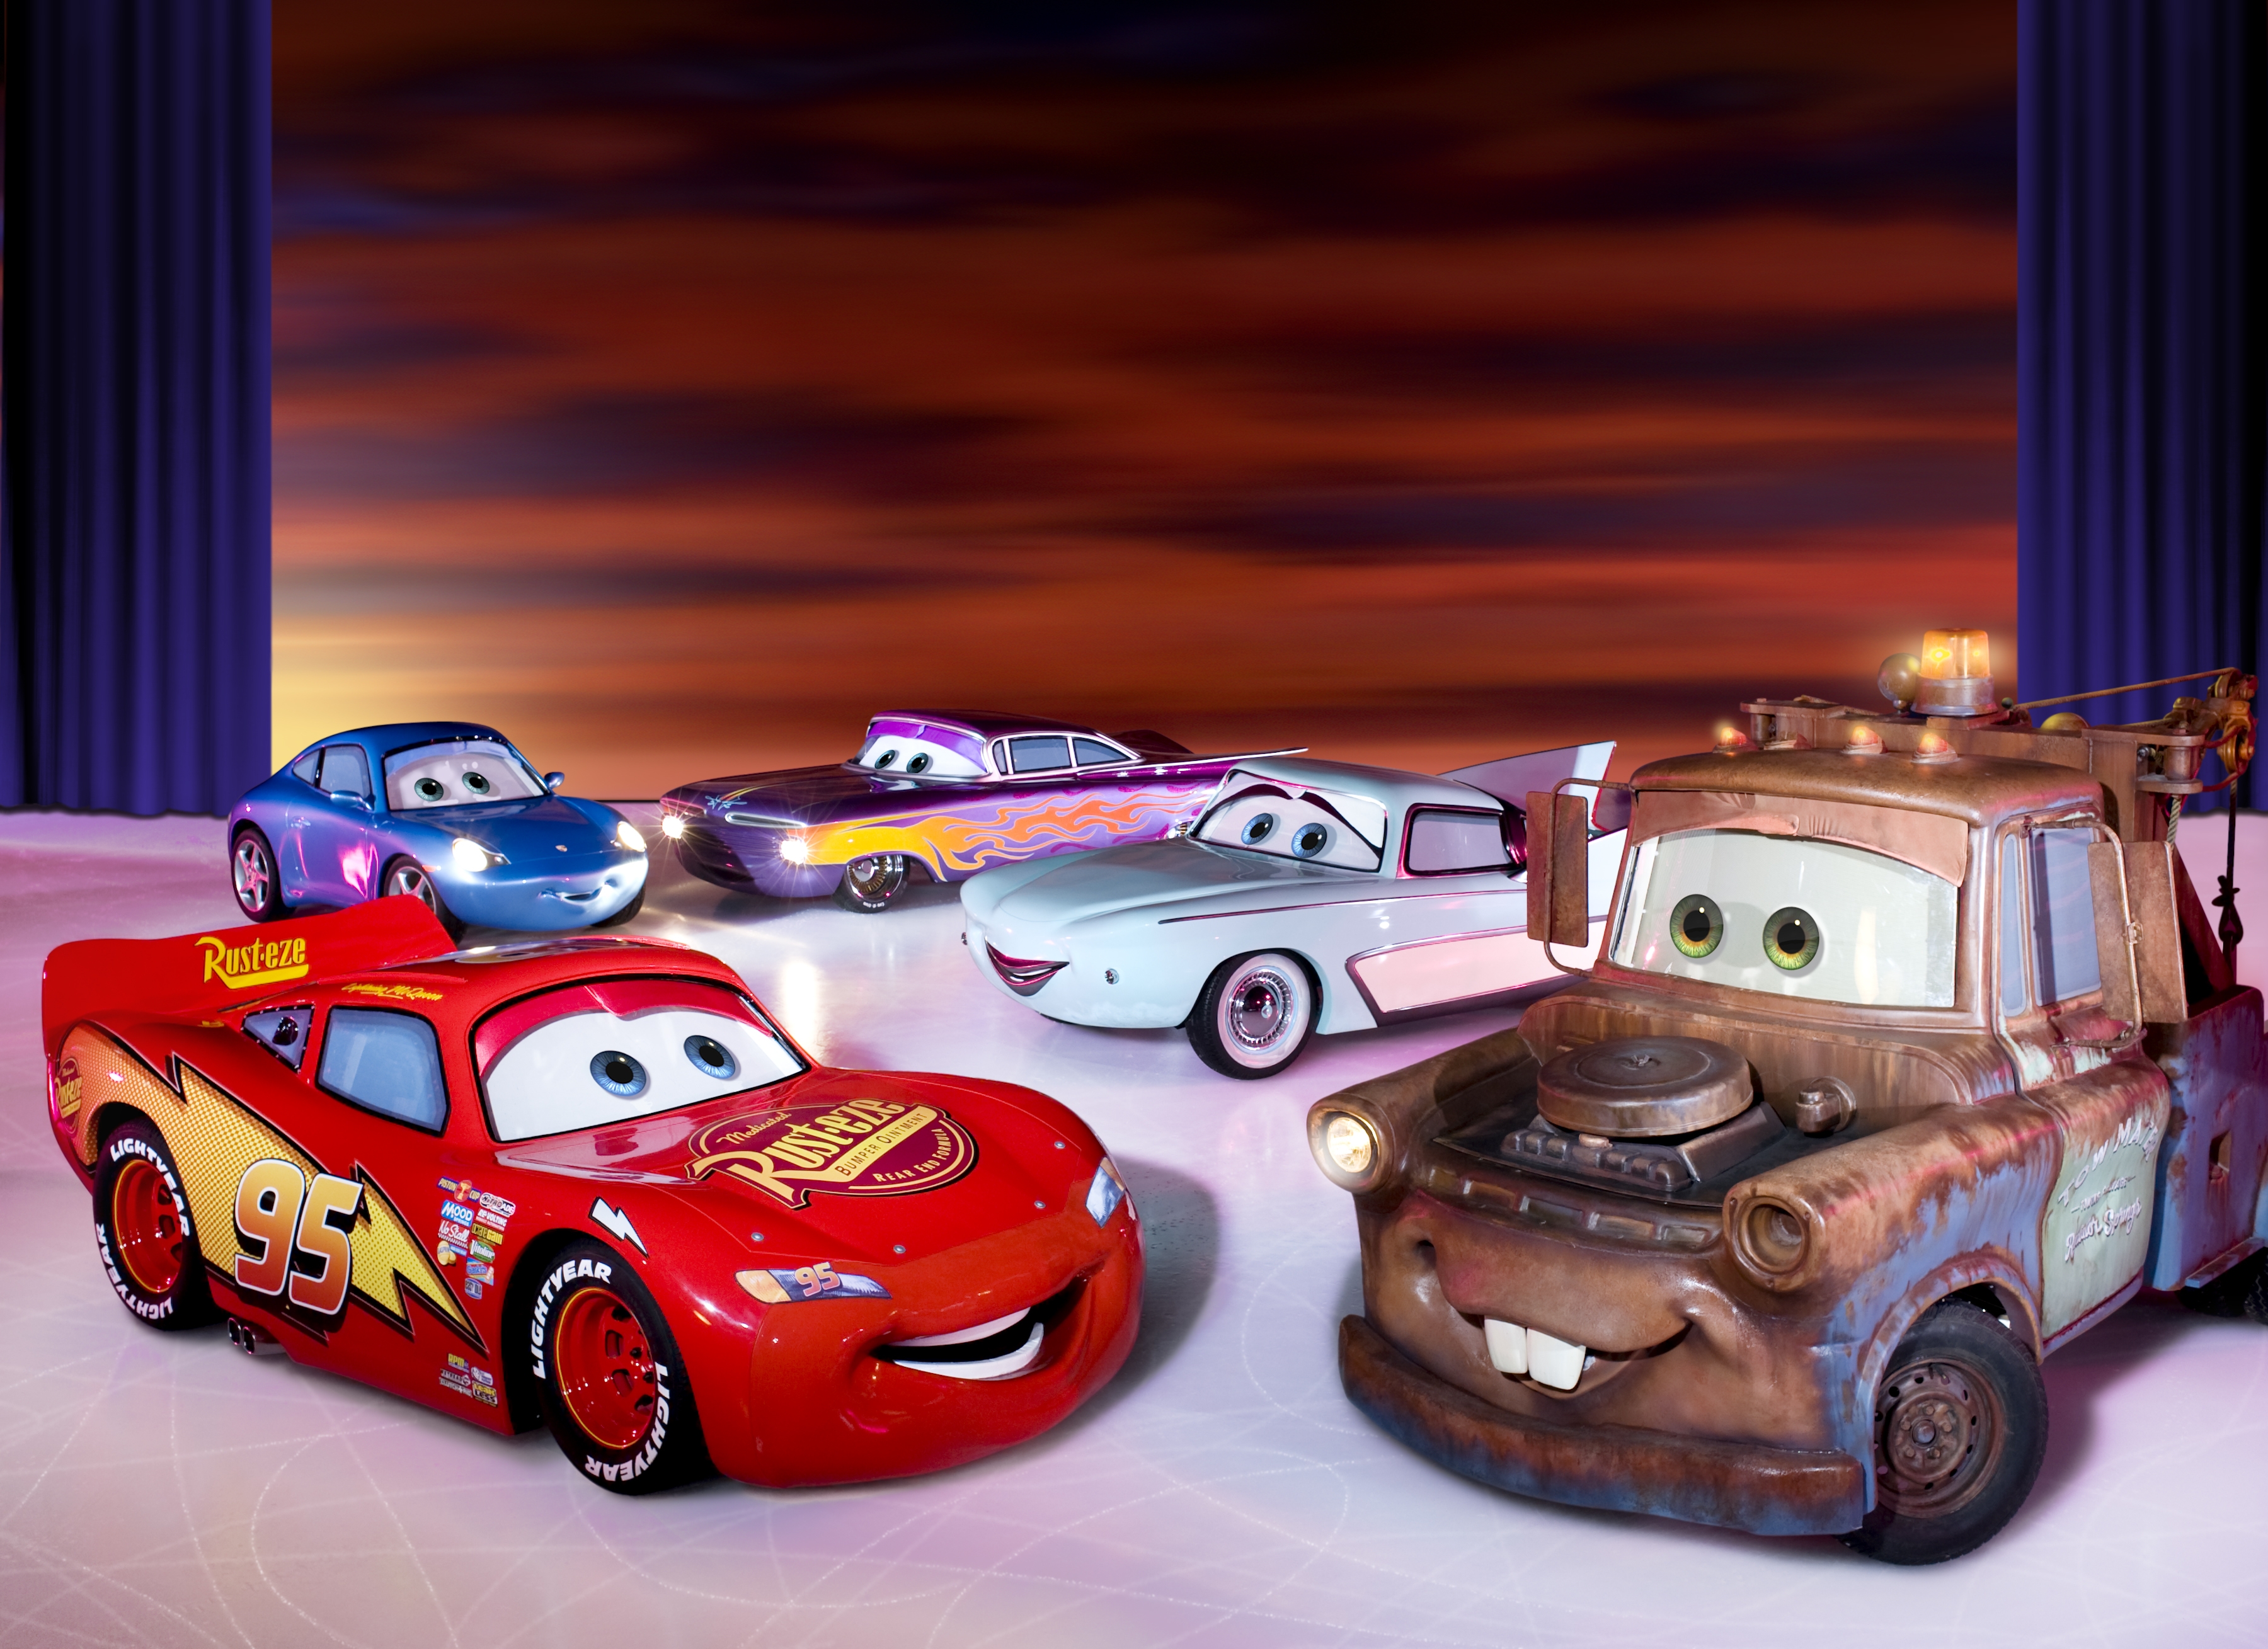 'Cars' in 'Disney on Ice: Worlds of Enchantment'